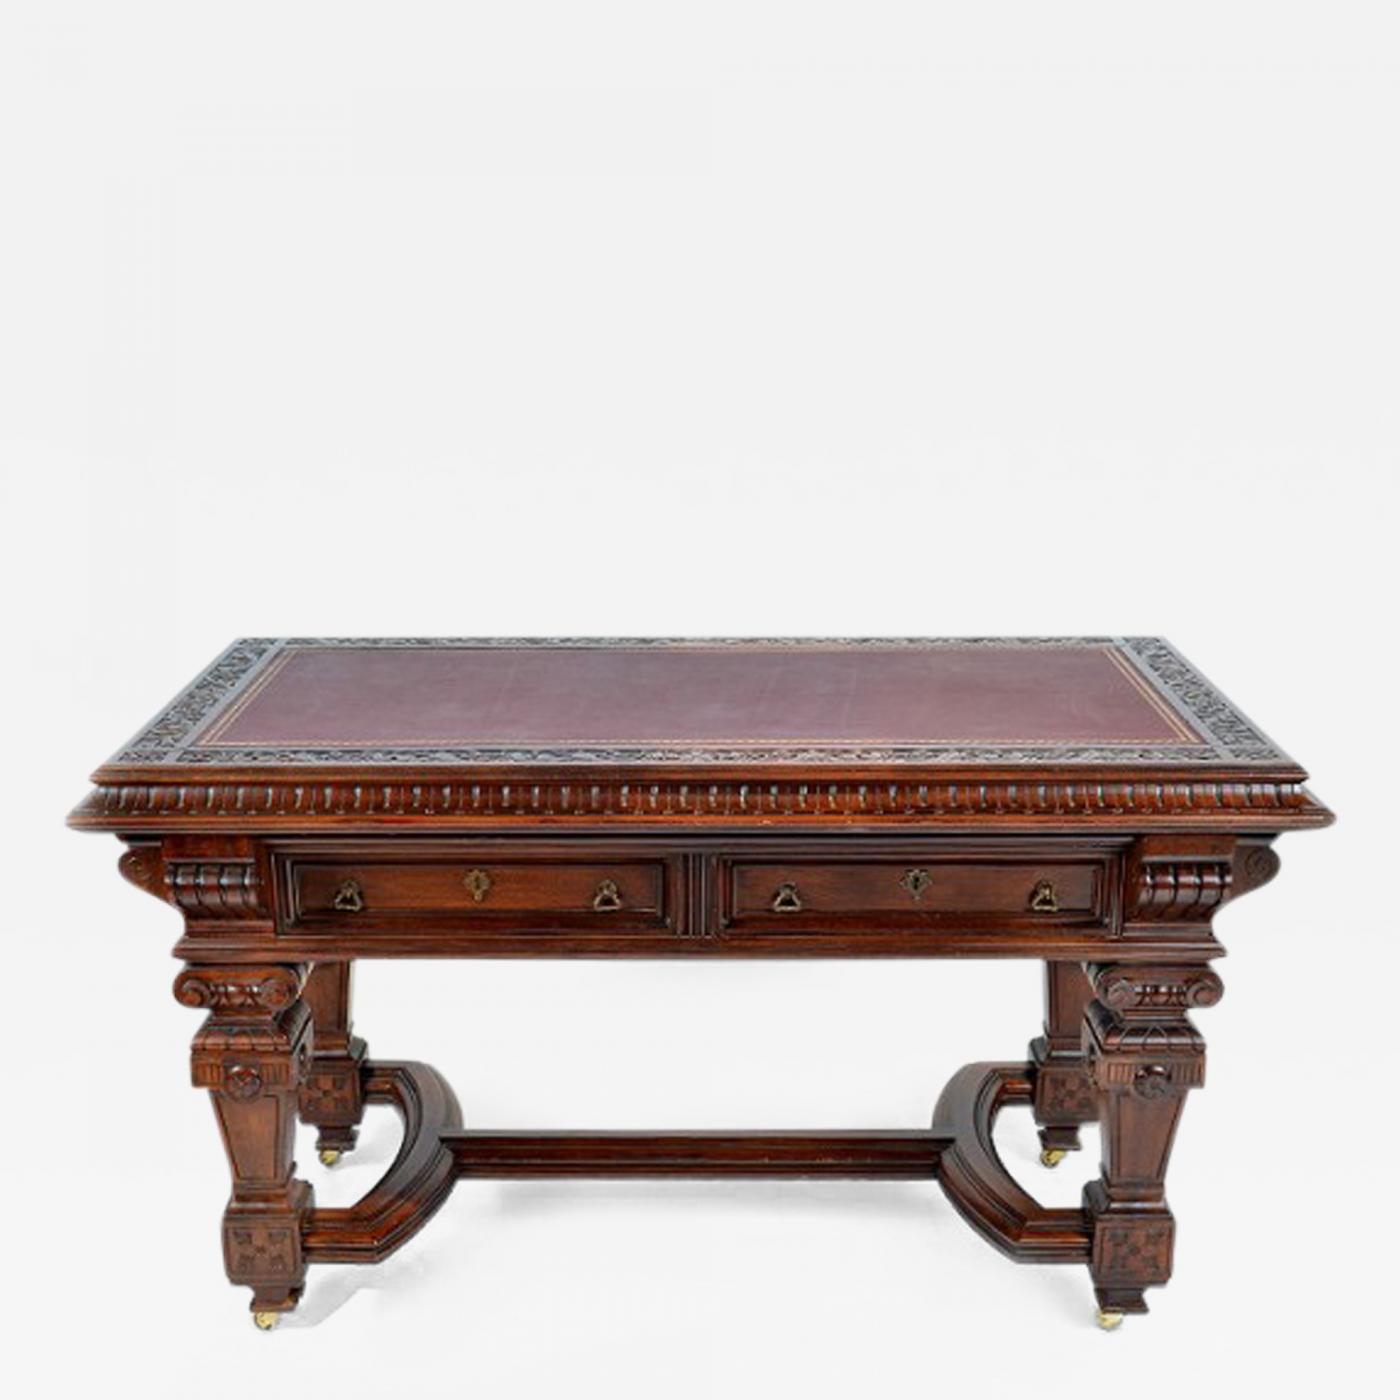 French Renaissance Revival Library Table Writing Desk Walnut